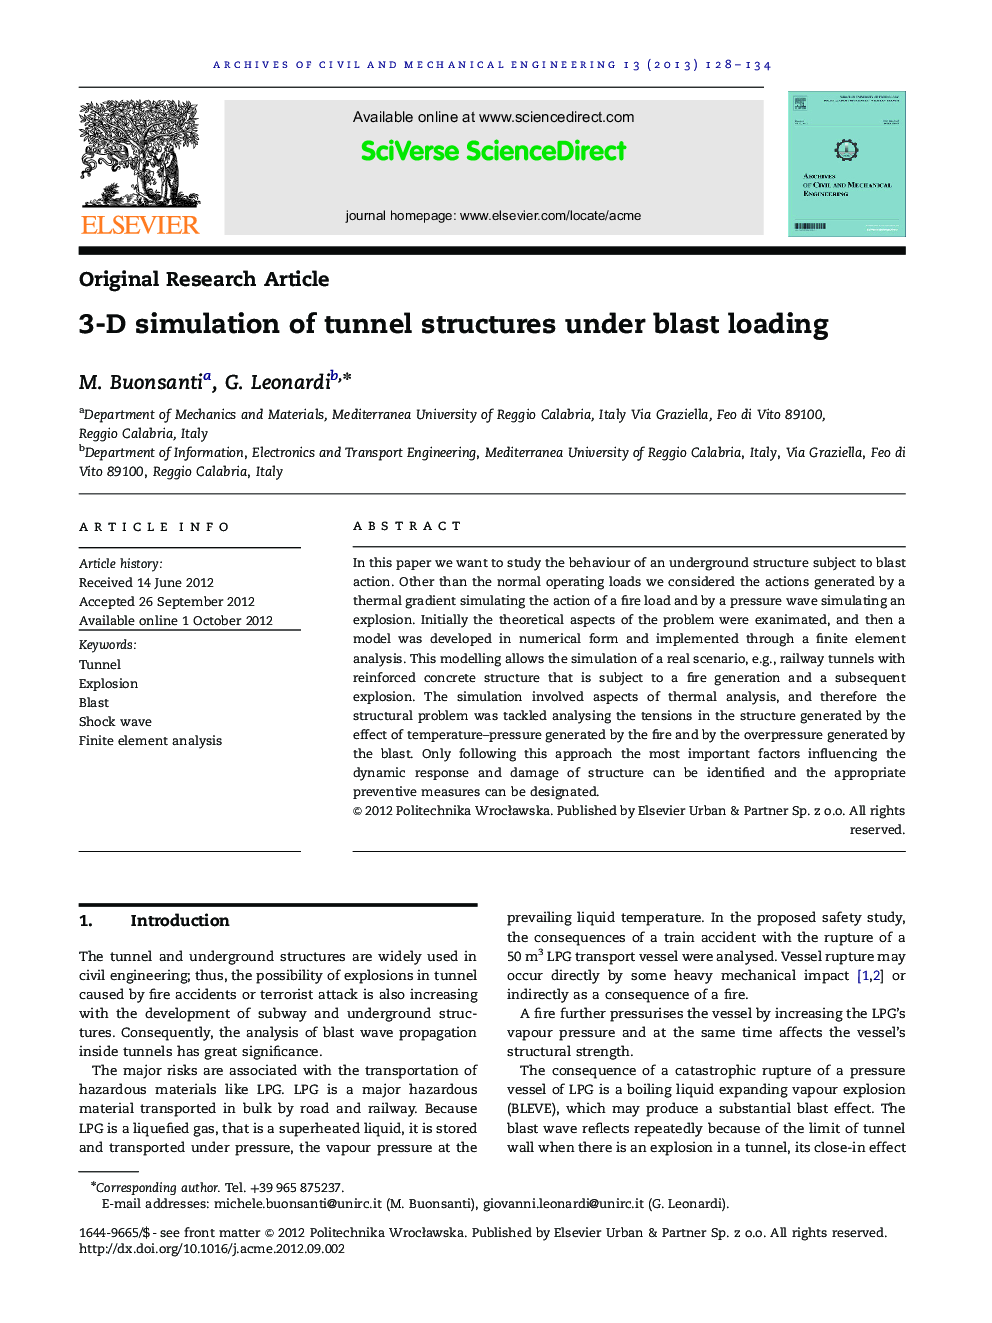 3-D simulation of tunnel structures under blast loading